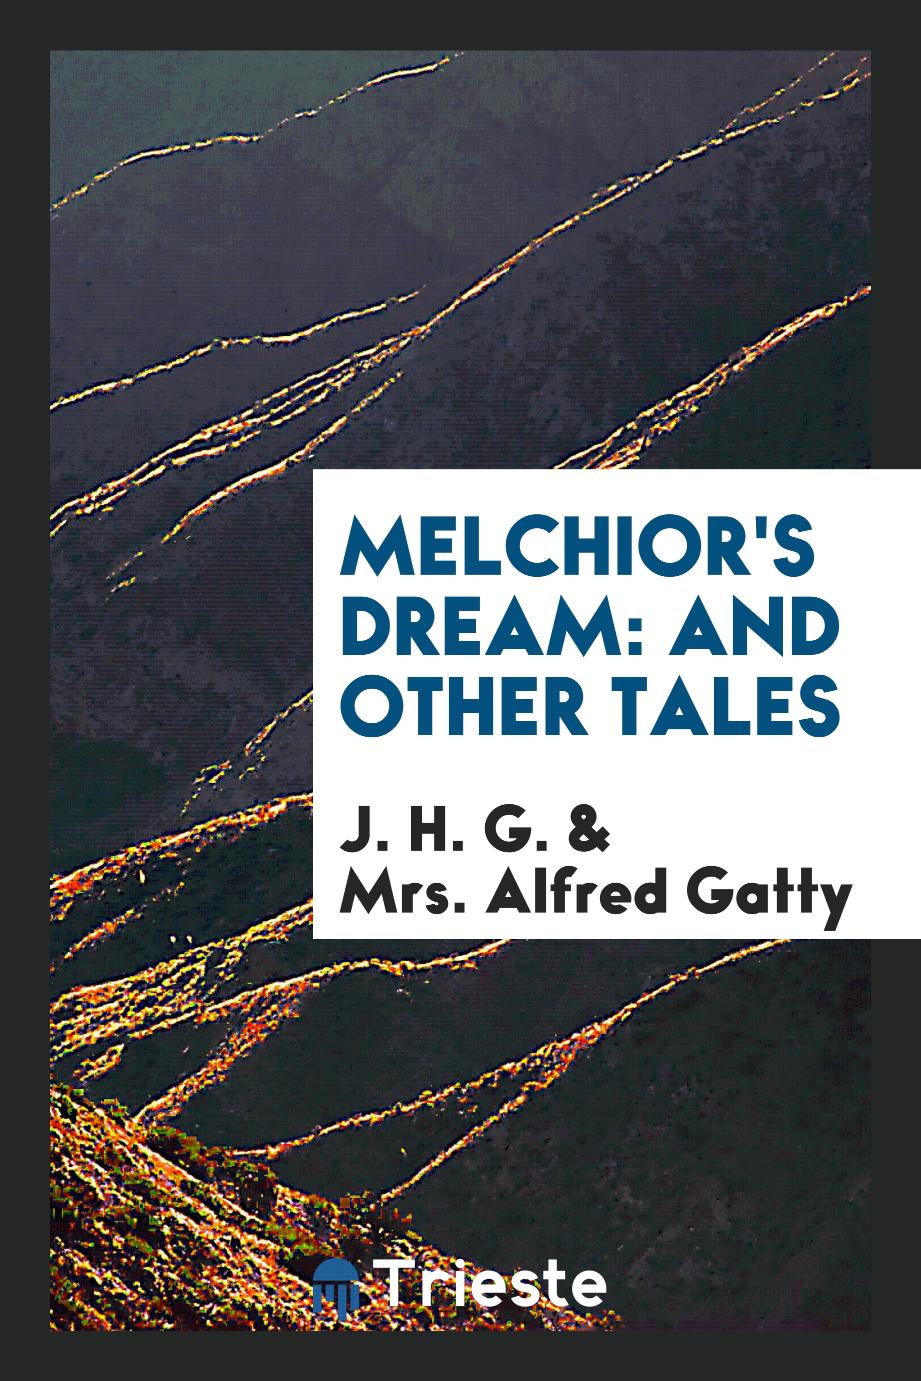 Melchior's dream: and other tales